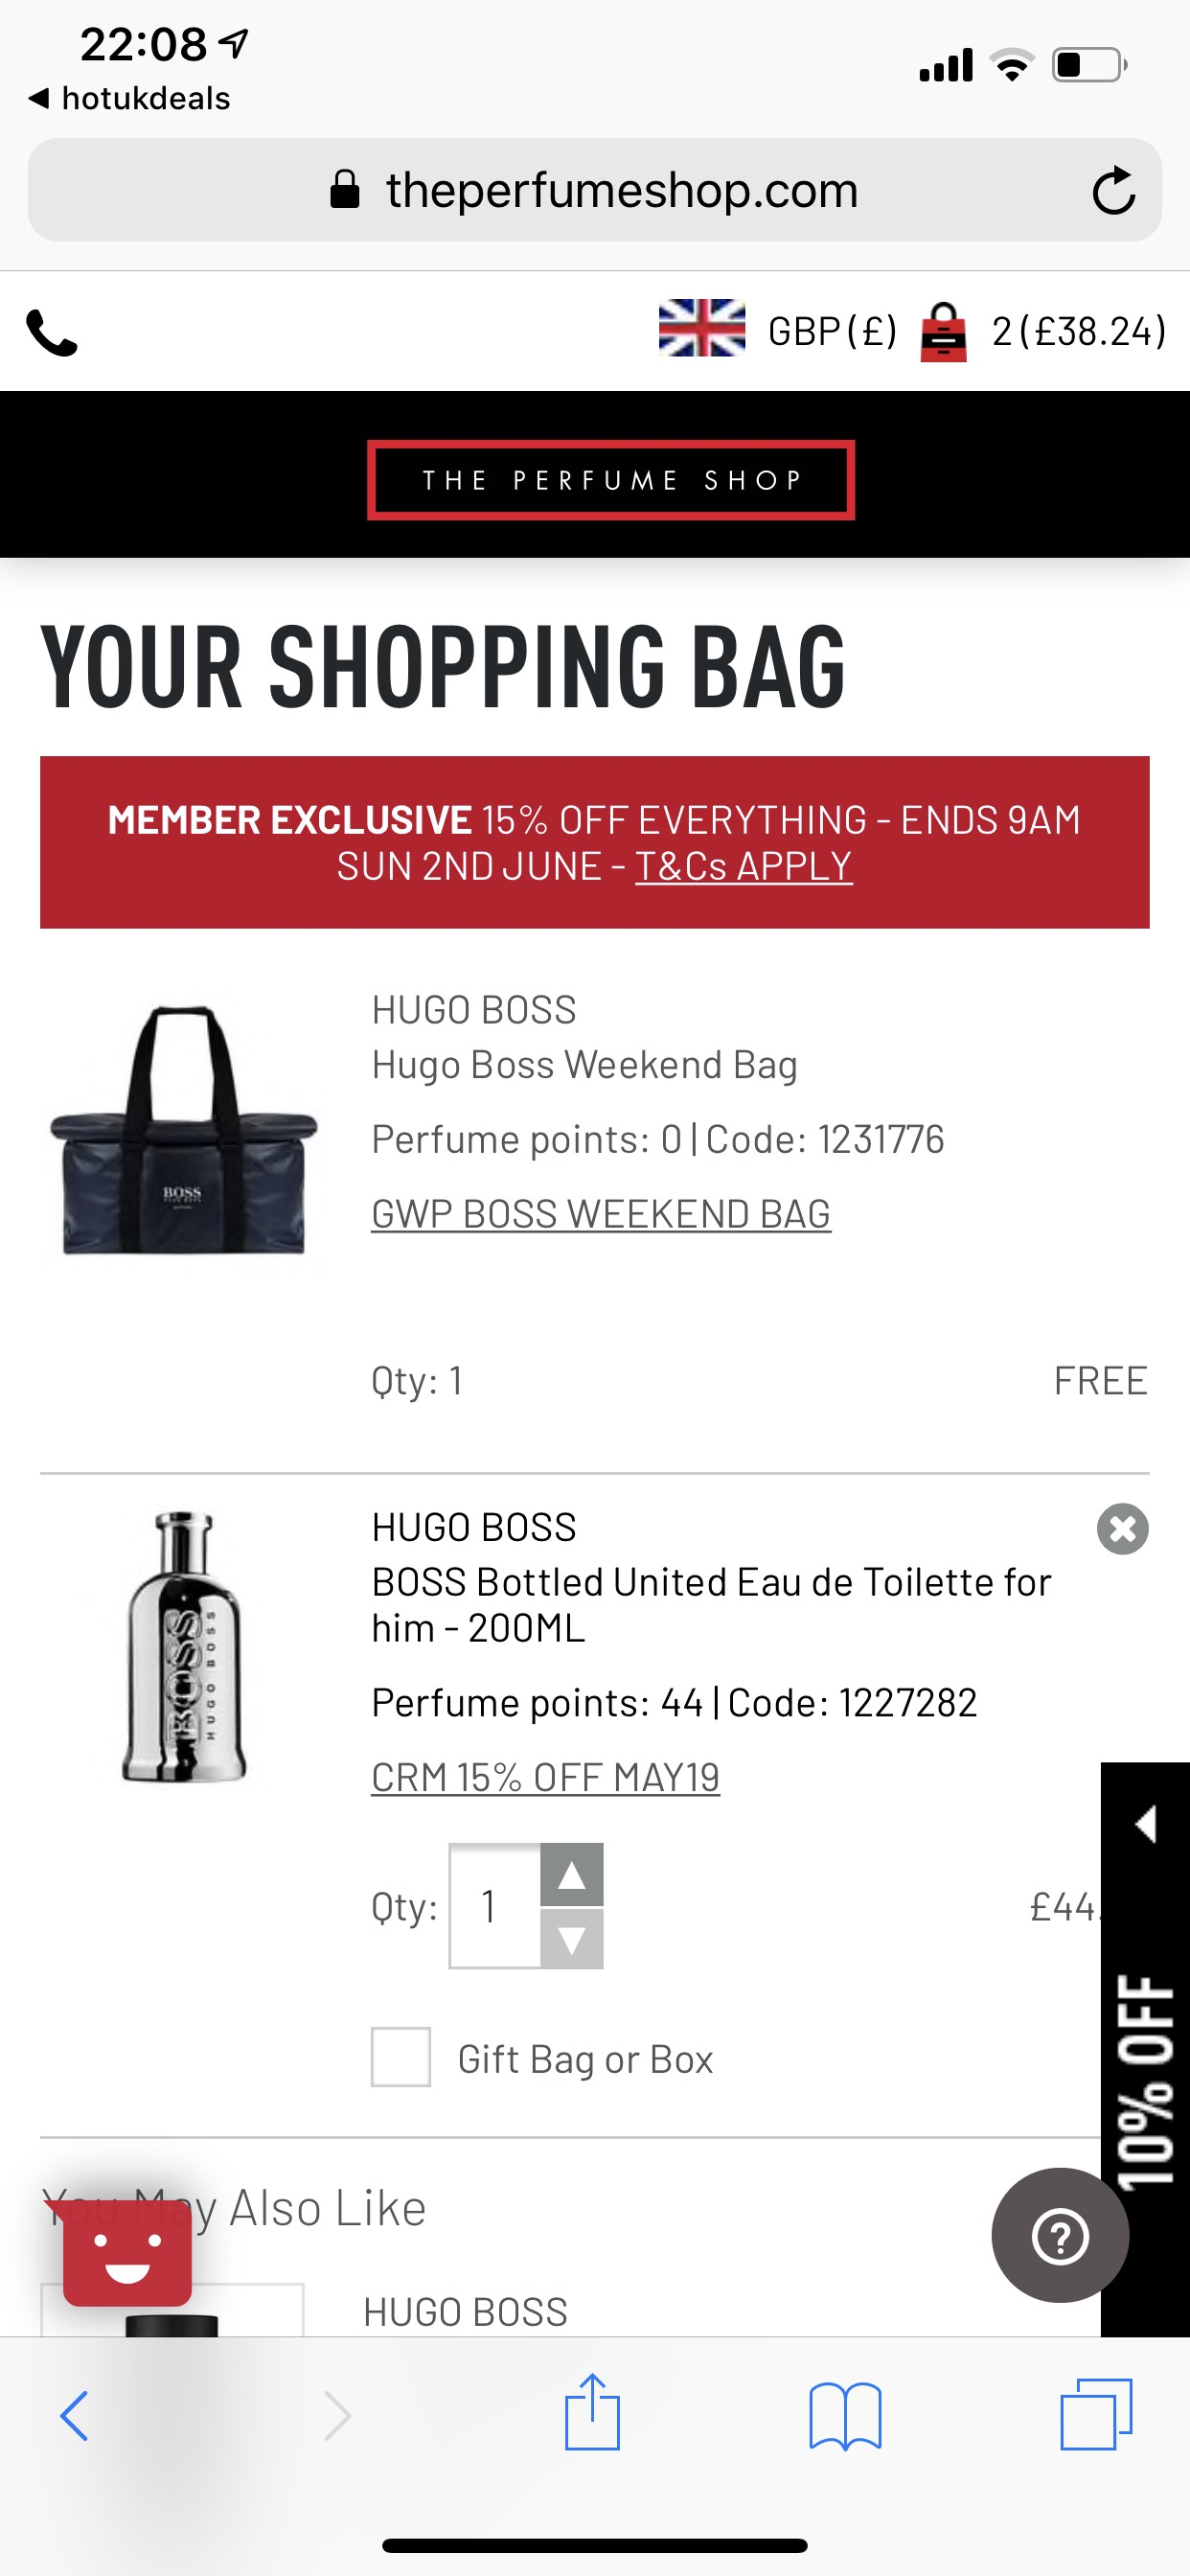 hugo boss aftershave with free weekend bag